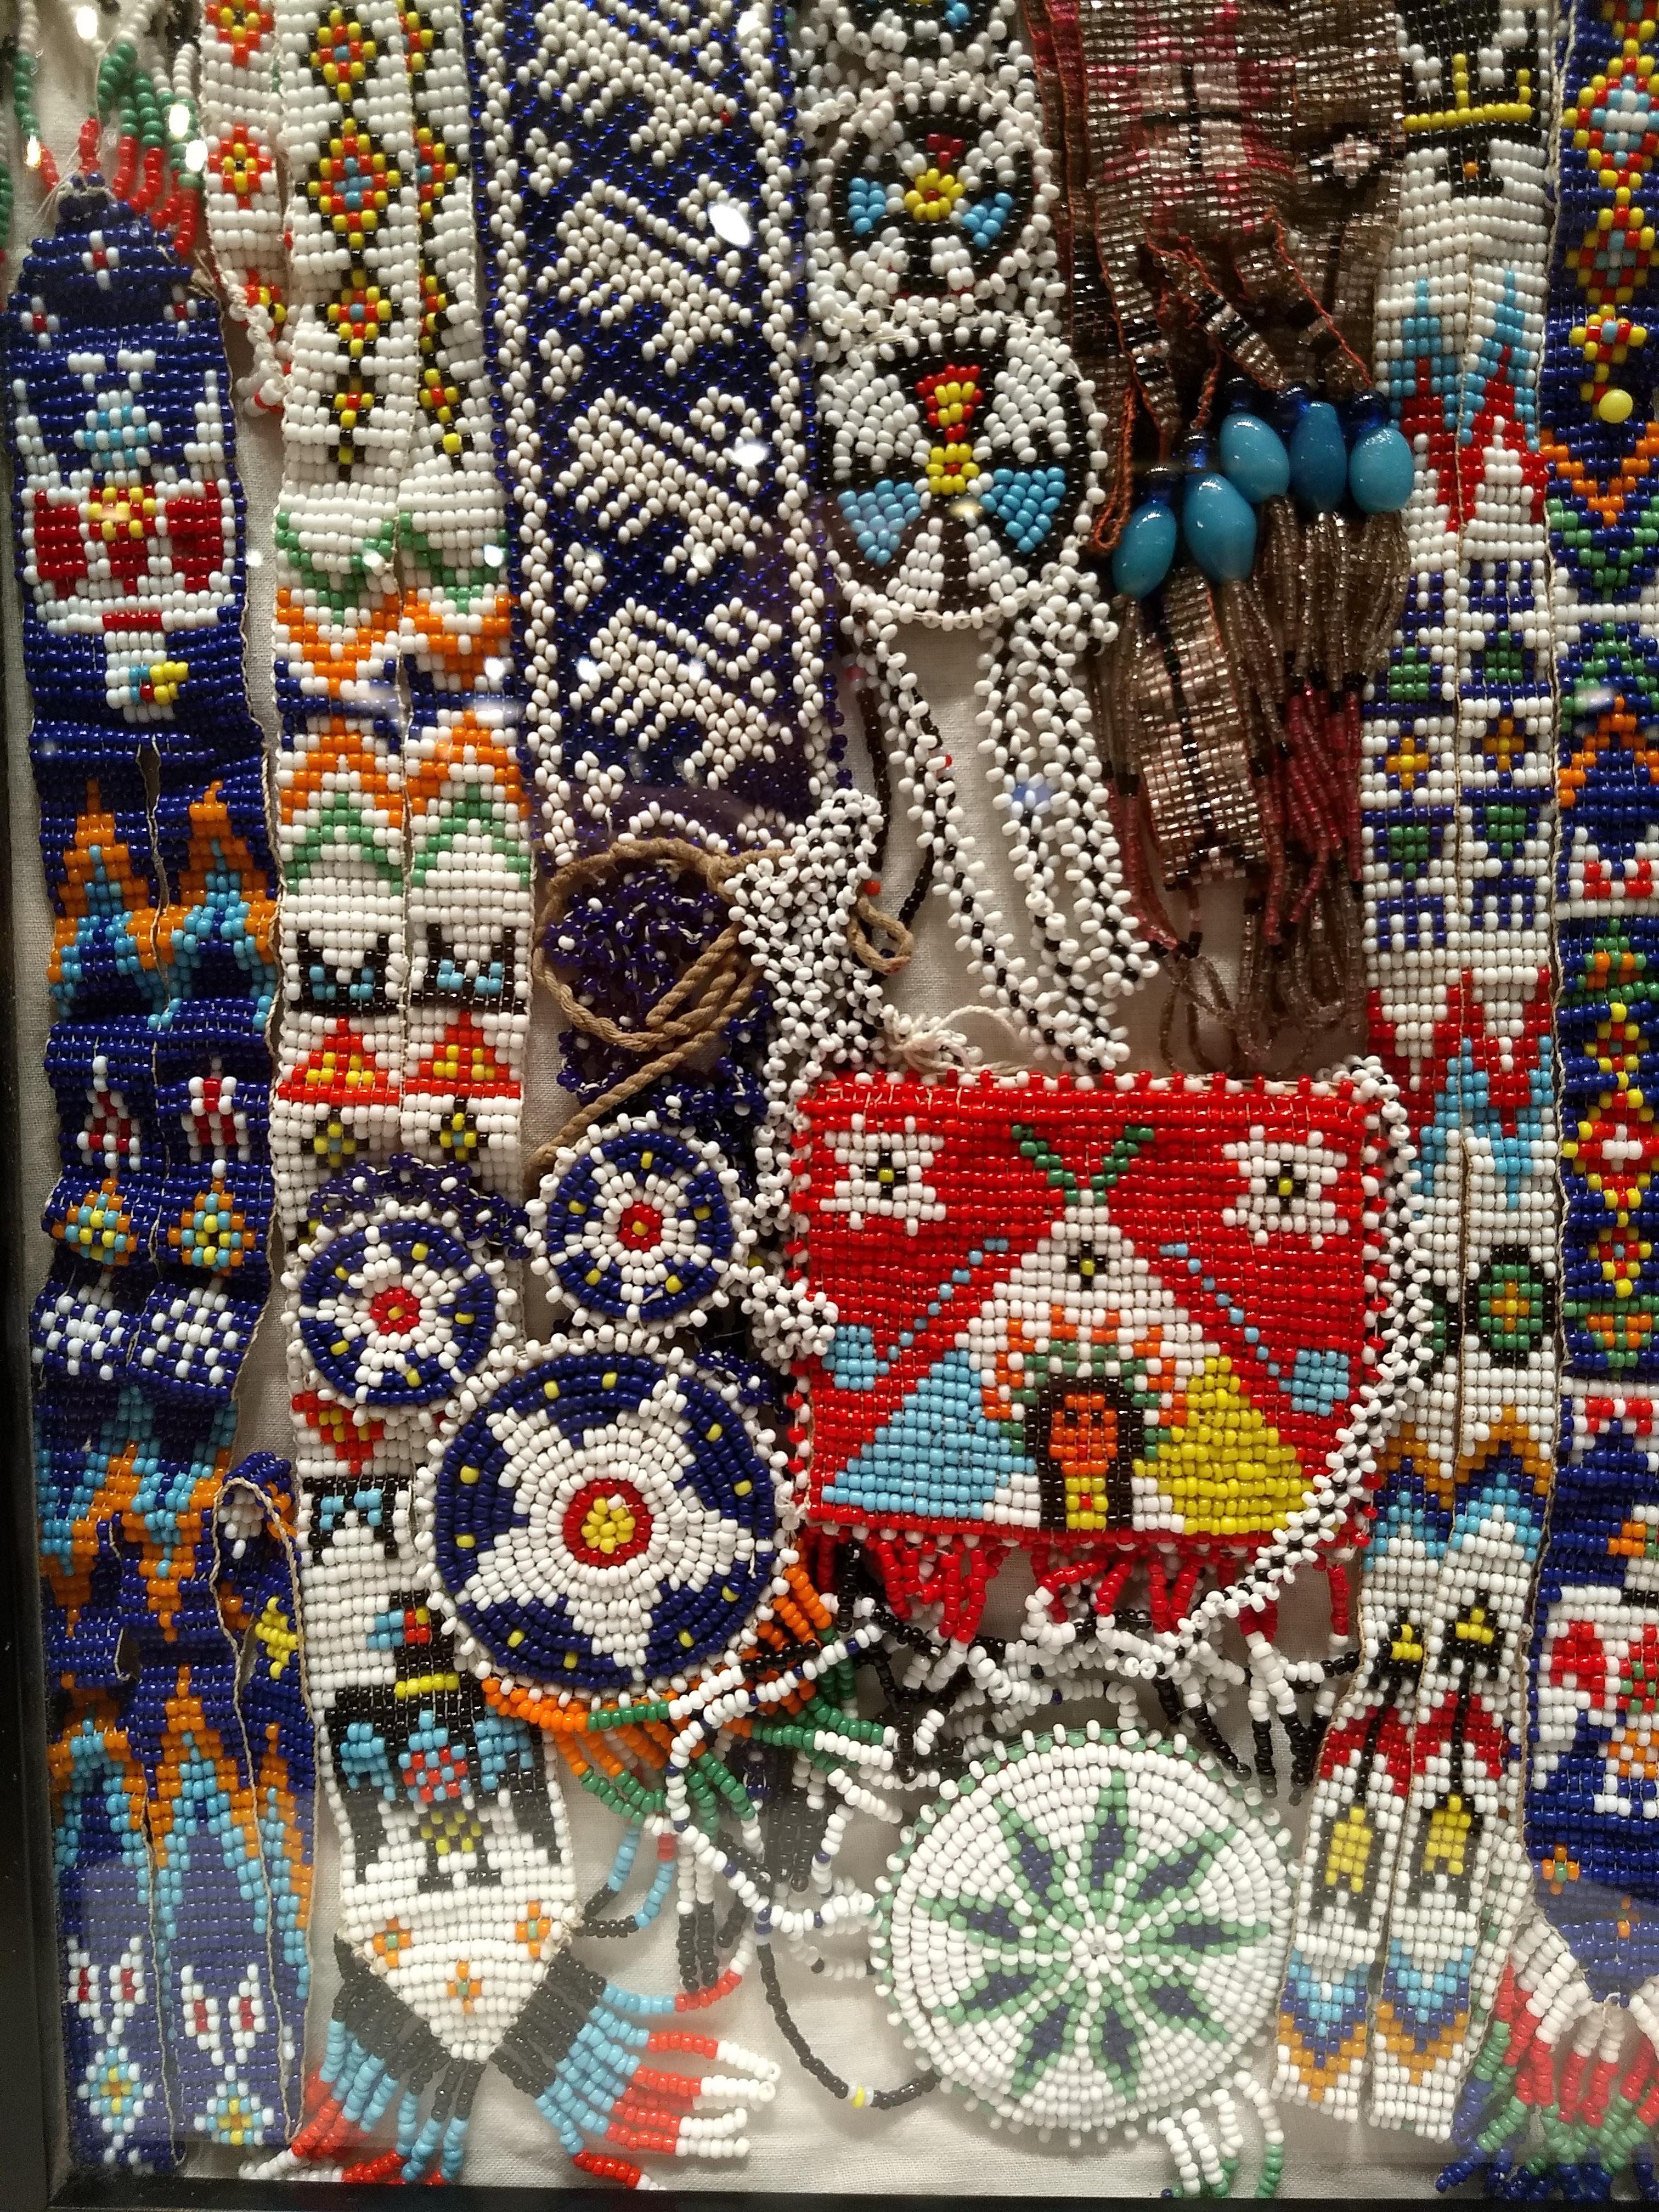 Native American Navajo Necklaces and Bracelets Beadwork Wall Art Collection.   The native American bead necklace collection contains ten different pieces, each individually hand-crafted bead artwork mounted in a shadow box for display on the table